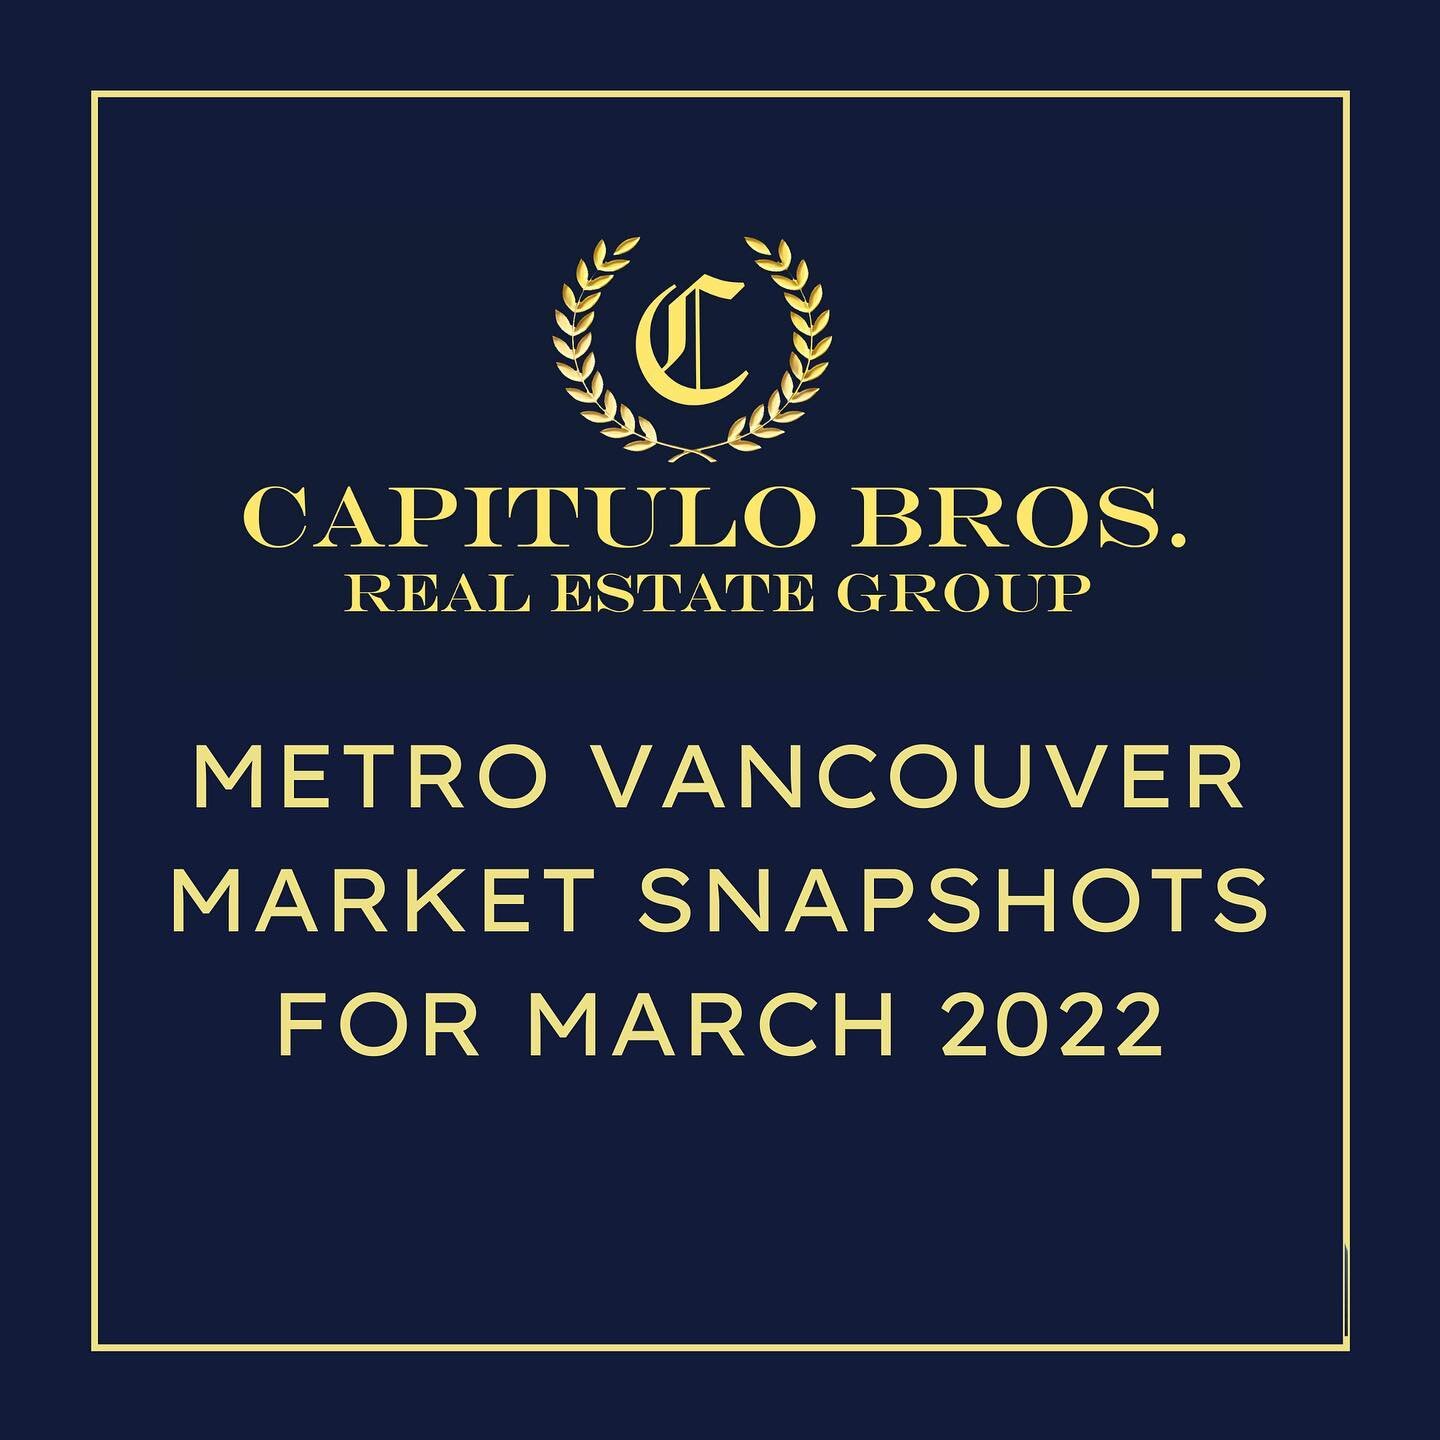 While down from last year&rsquo;s record numbers, home sale activity in Metro Vancouver&rsquo;s housing market remained elevated in March.

The Real Estate Board of Greater Vancouver (REBGV) reports that residential home sales in the region totalled 